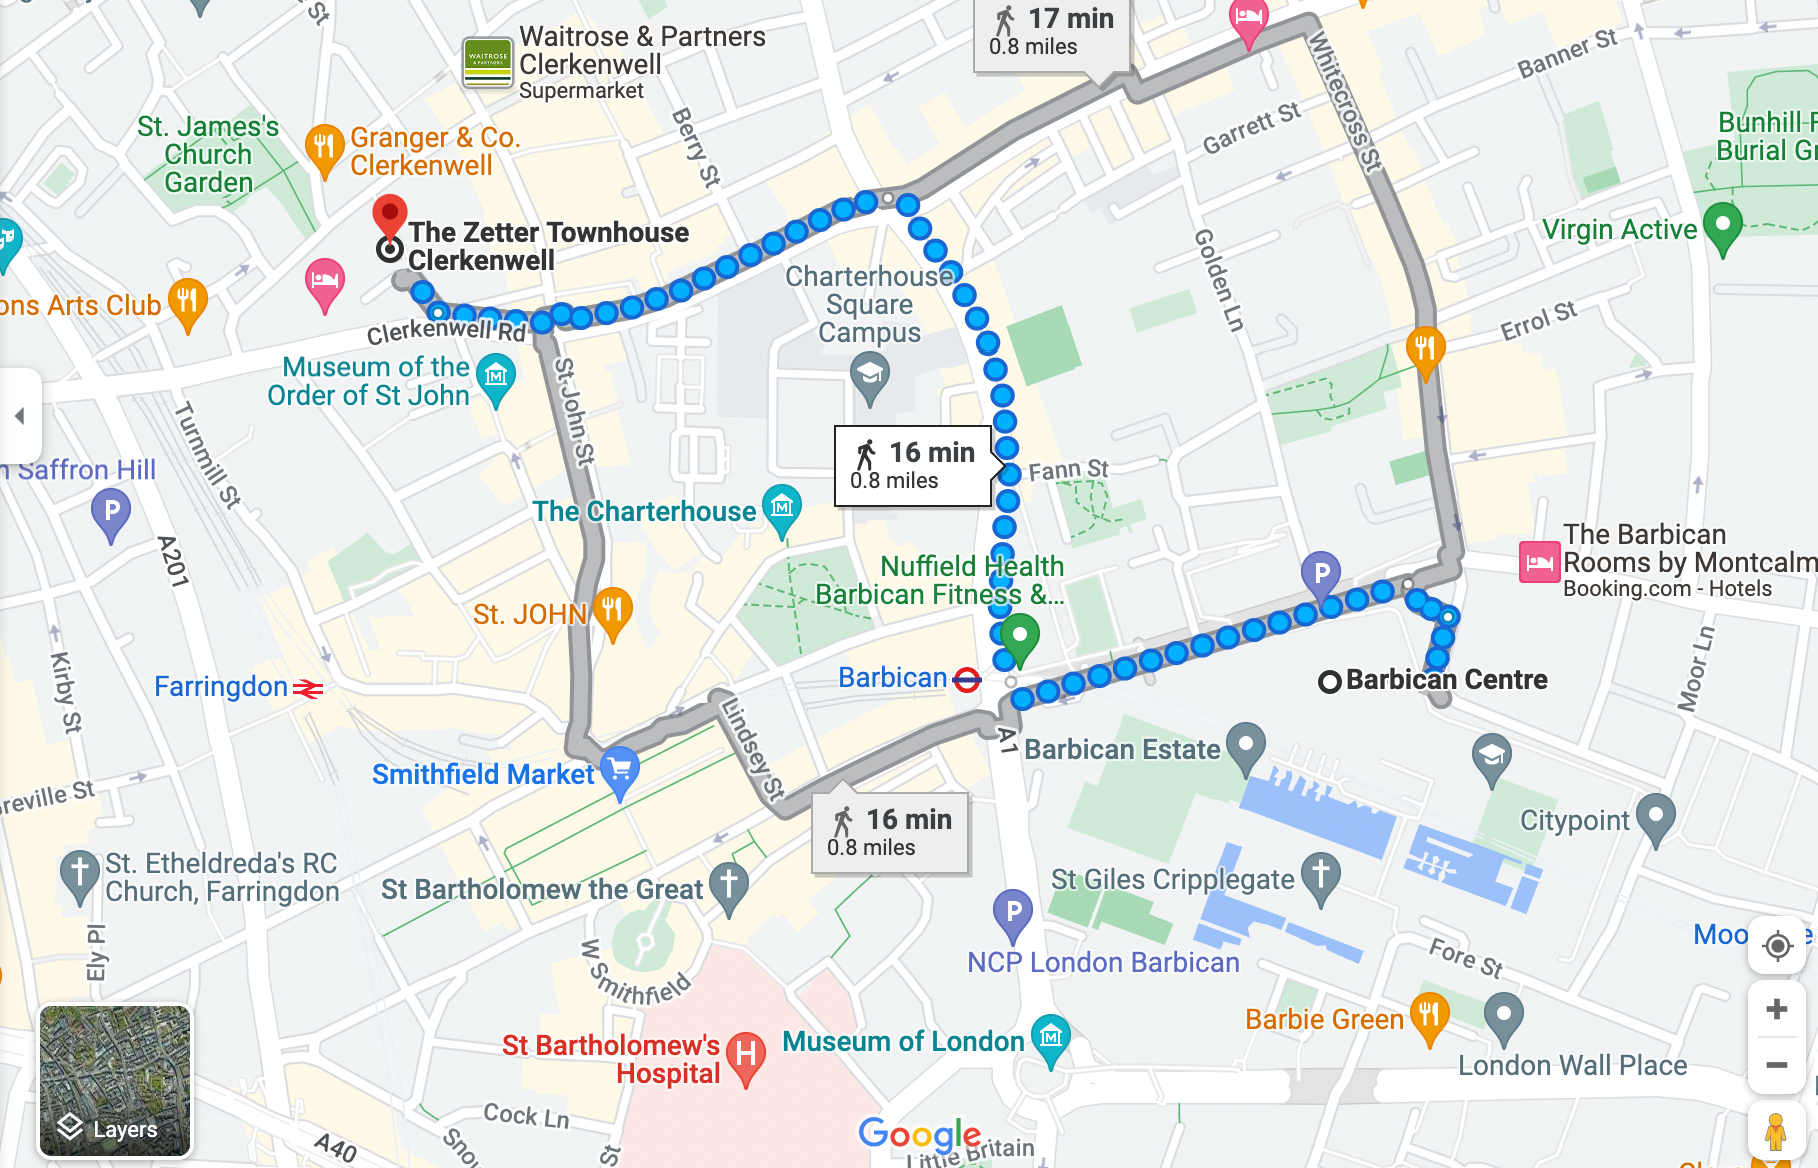 Google maps directions from Barbican Centre to the Zetter Townhouse Hotel